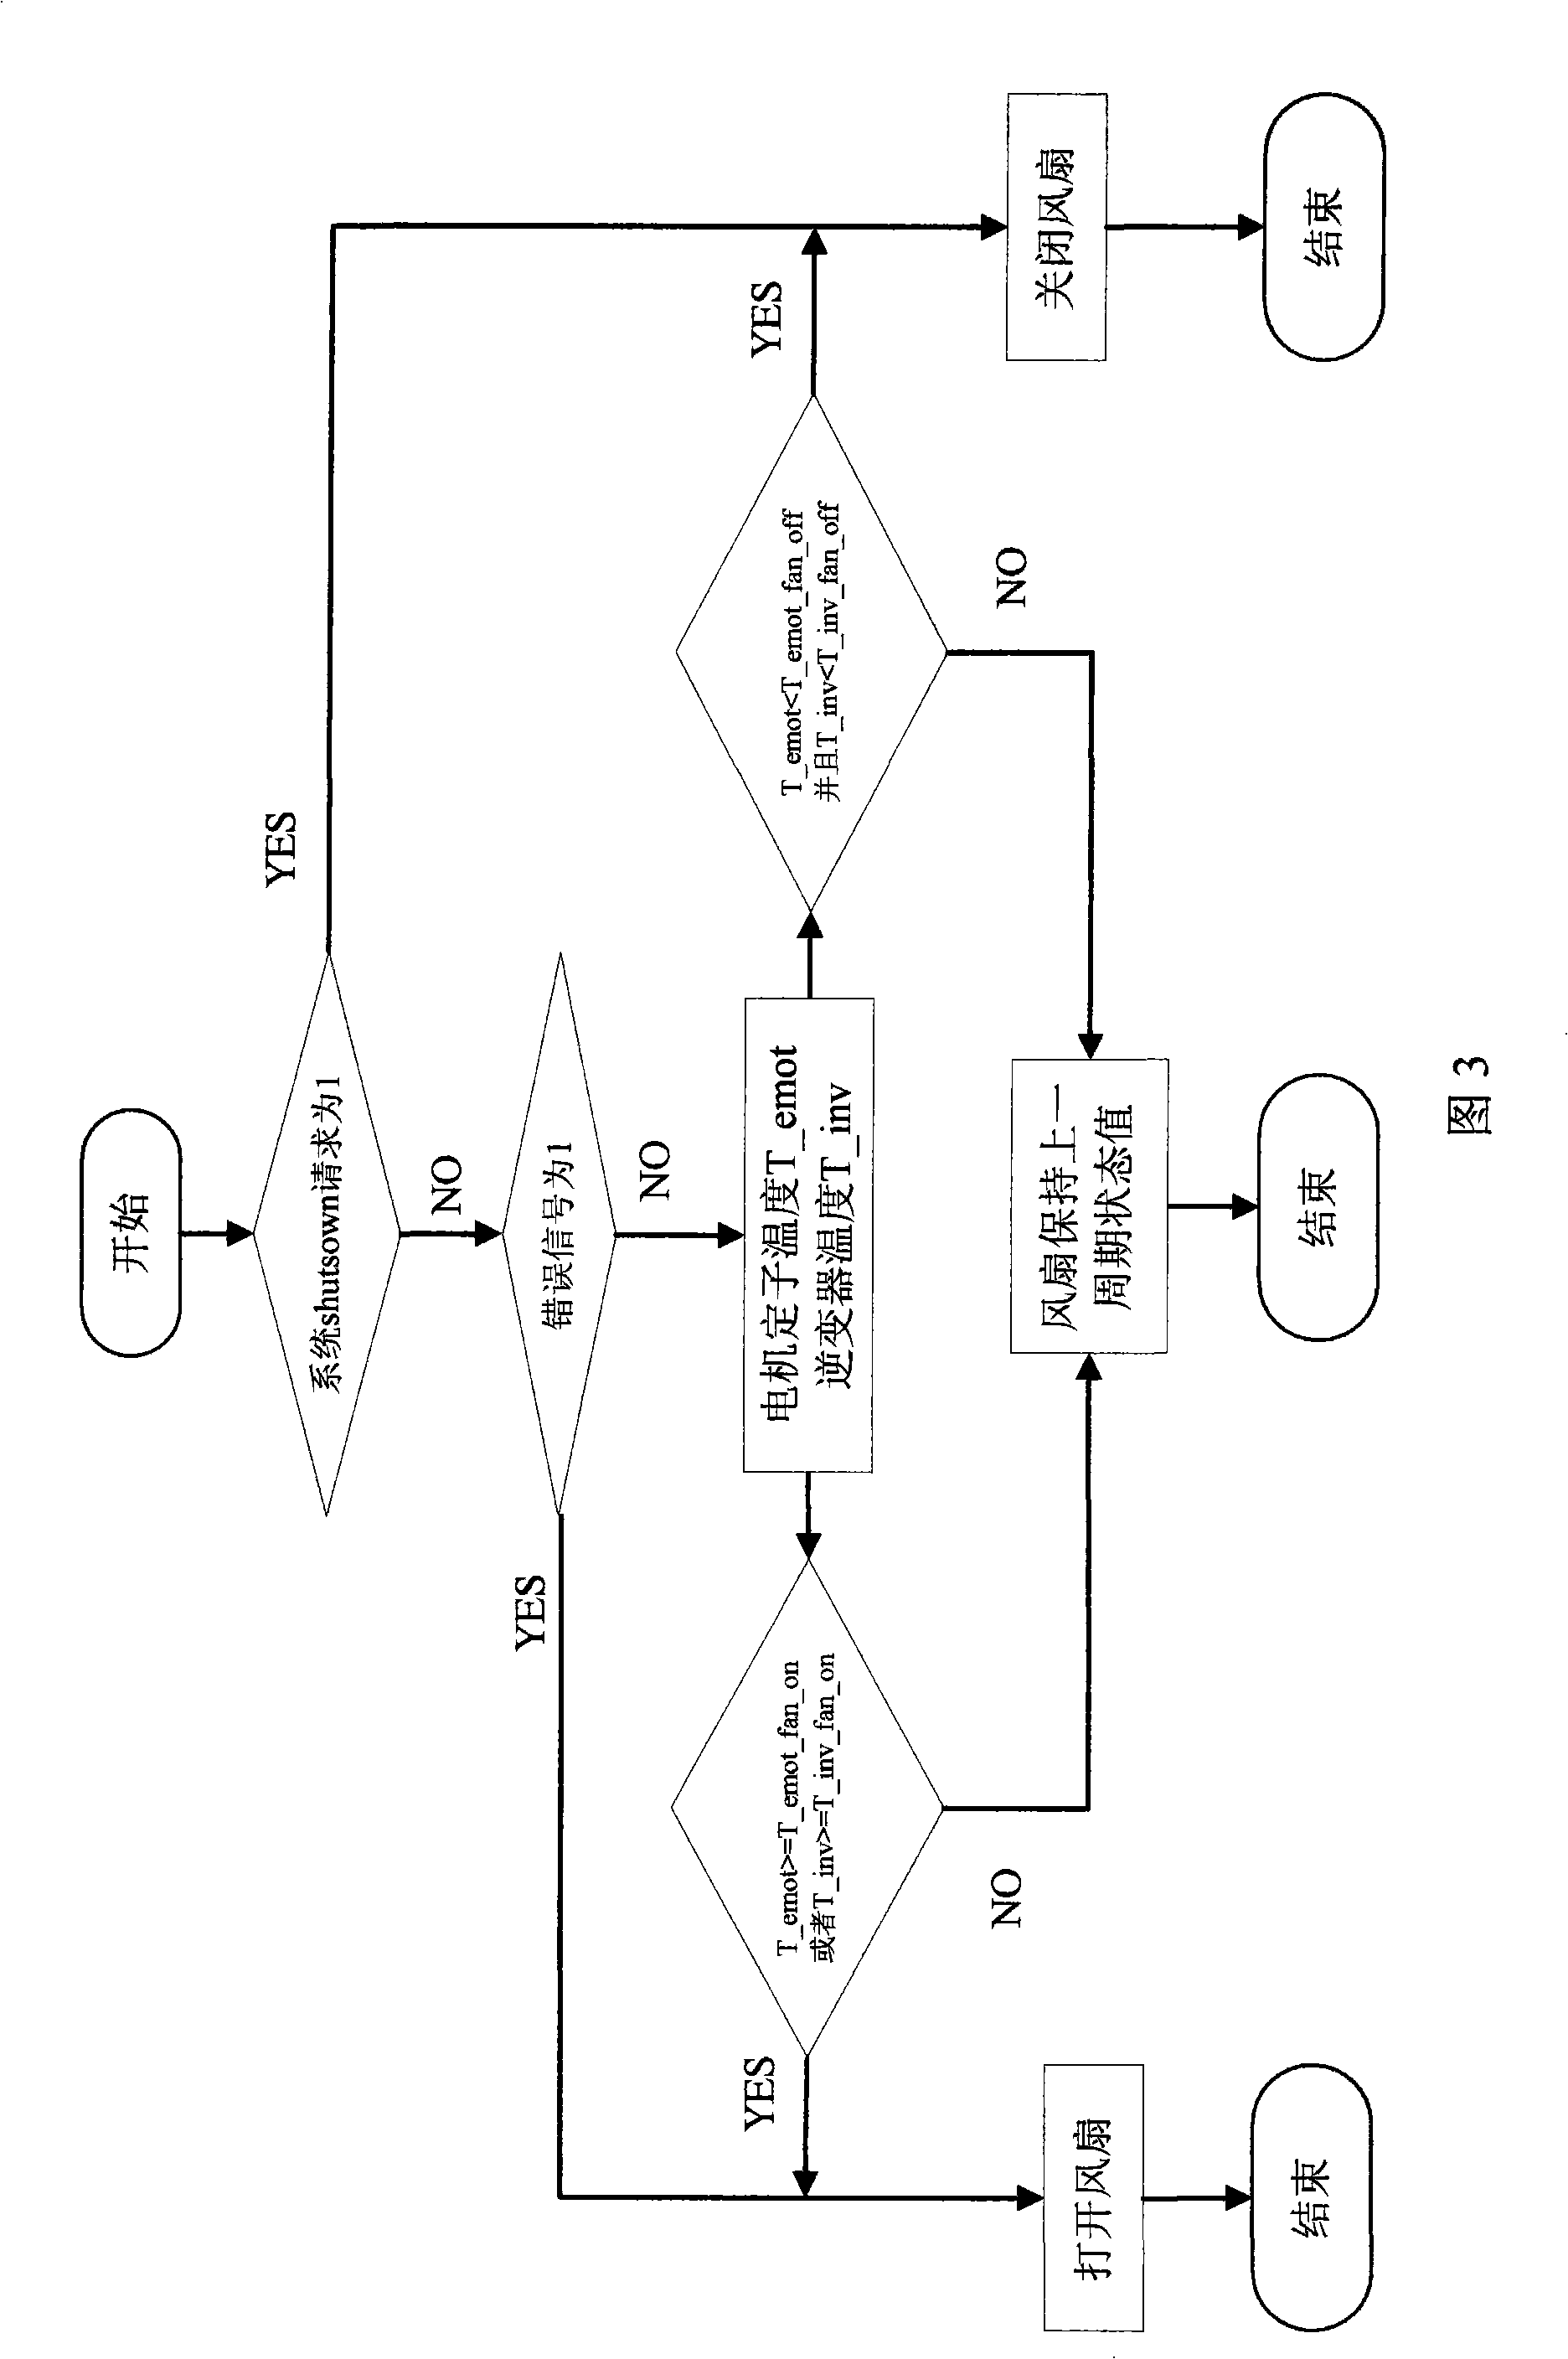 Control method for cooling system of hybrid vehicle